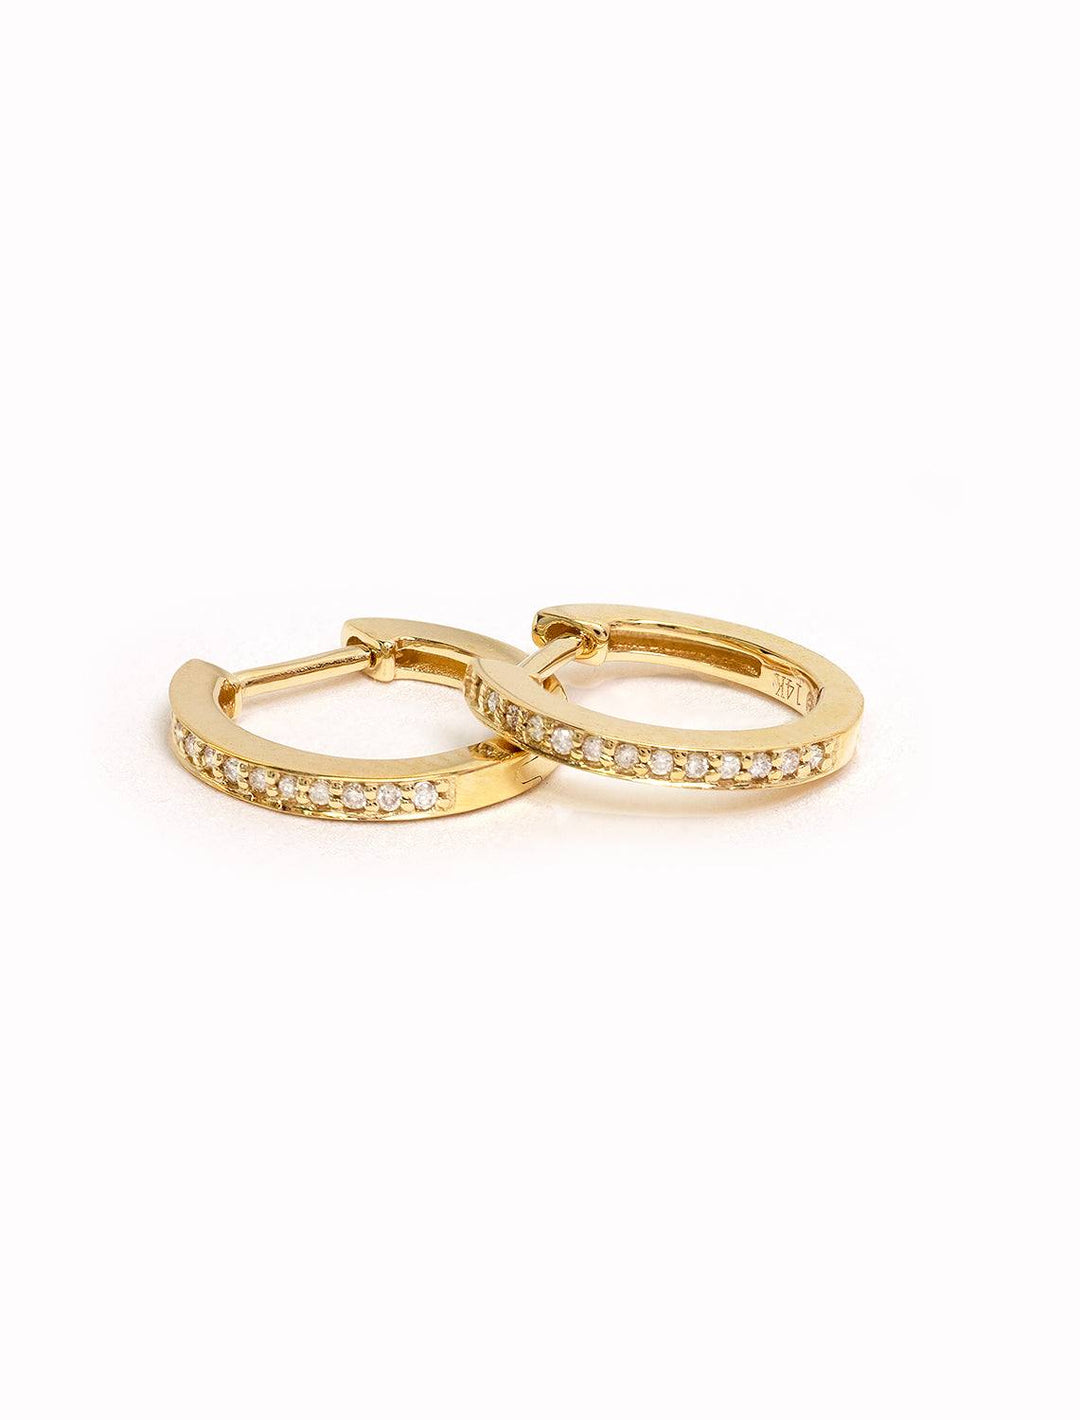 Stylized laydown of Sydney Evan's pave huggie hoops in yellow gold.